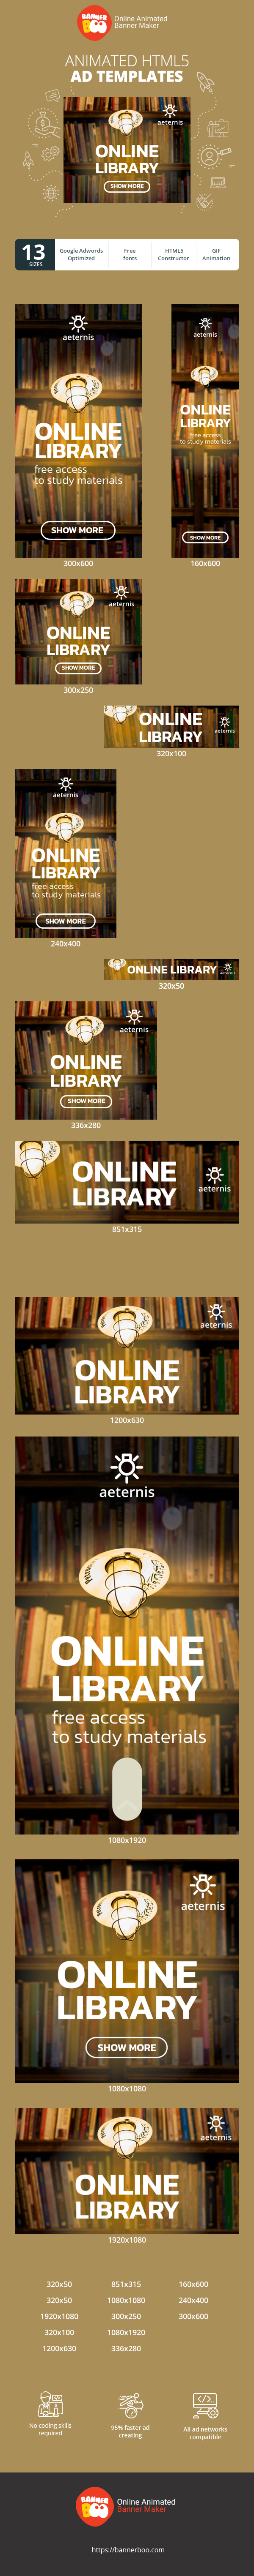 Banner ad template — Online Library — Free Access To Study Materials